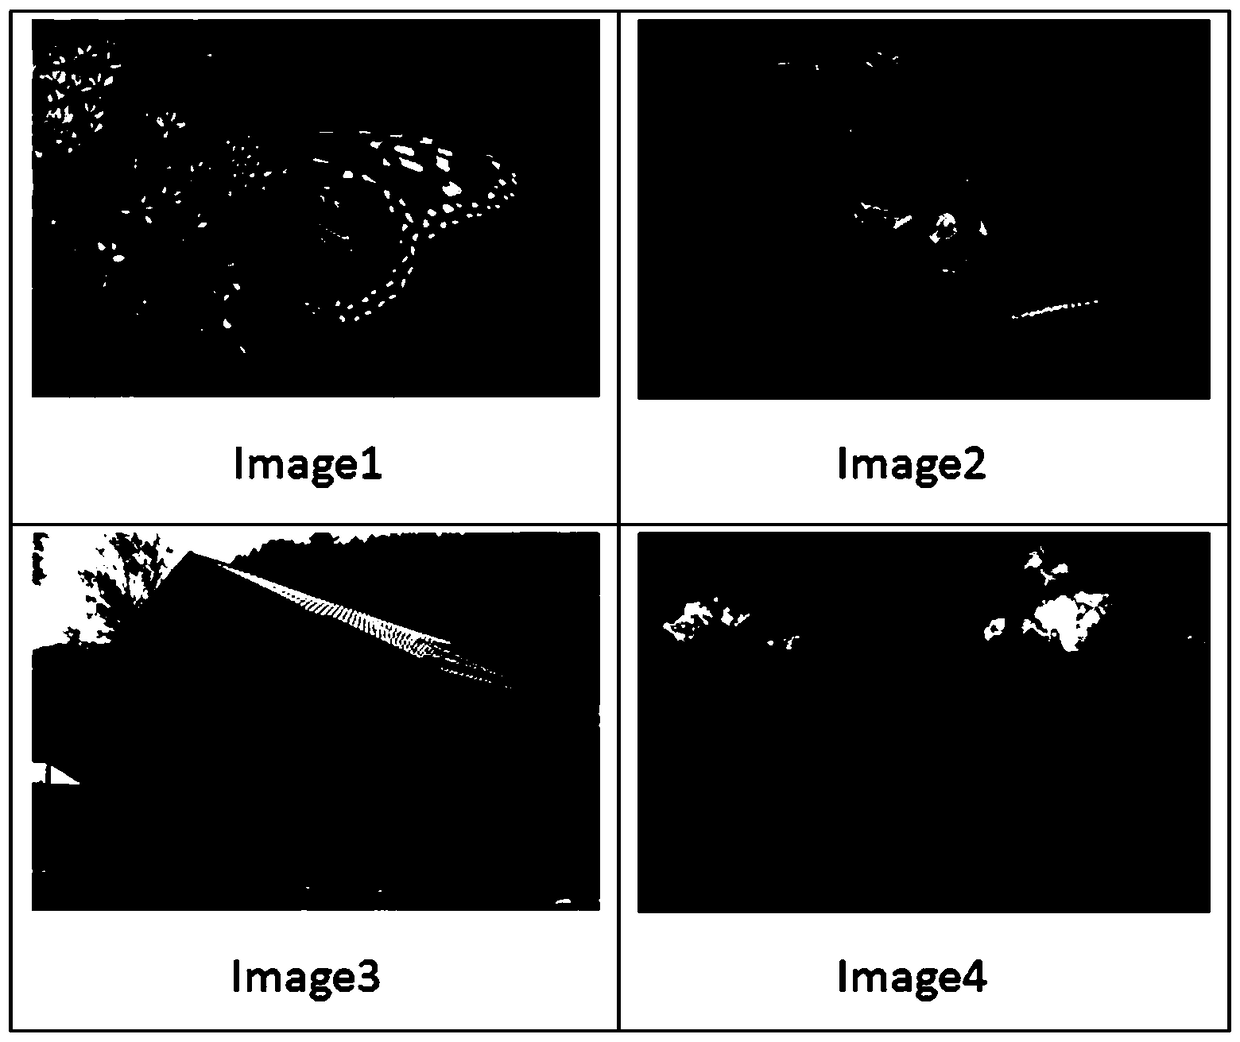 Fuzzy detection method for SVD (Singular Value Decomposition) on the basis of image DCT (Discrete Cosine Transform) domain